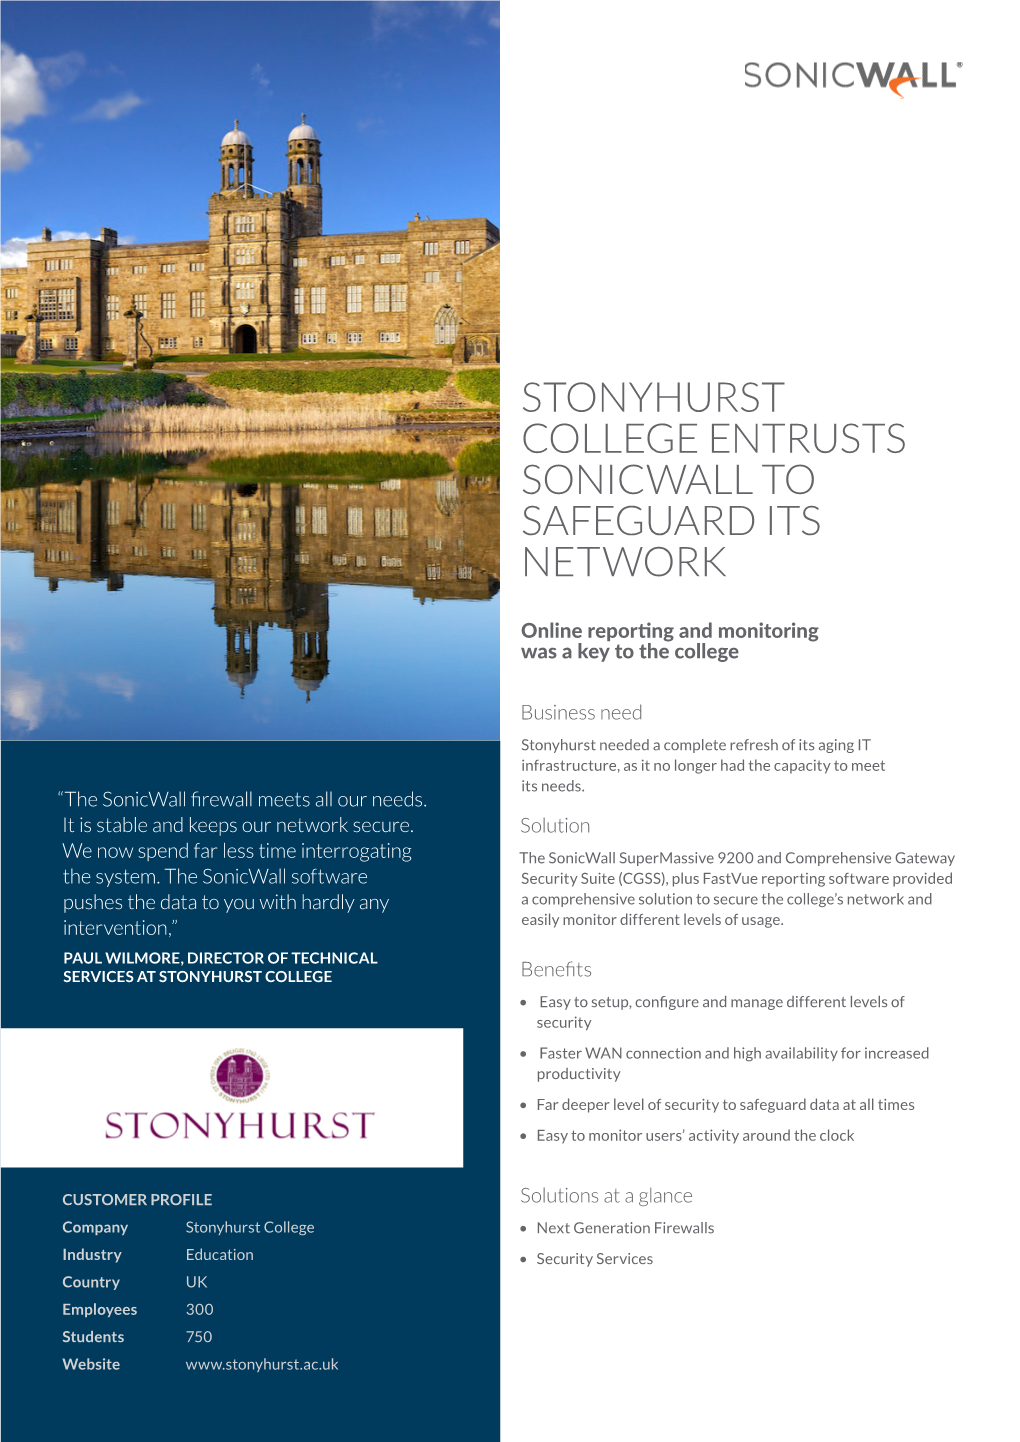 Stonyhurst College Entrusts Sonicwall to Safeguard Its Network